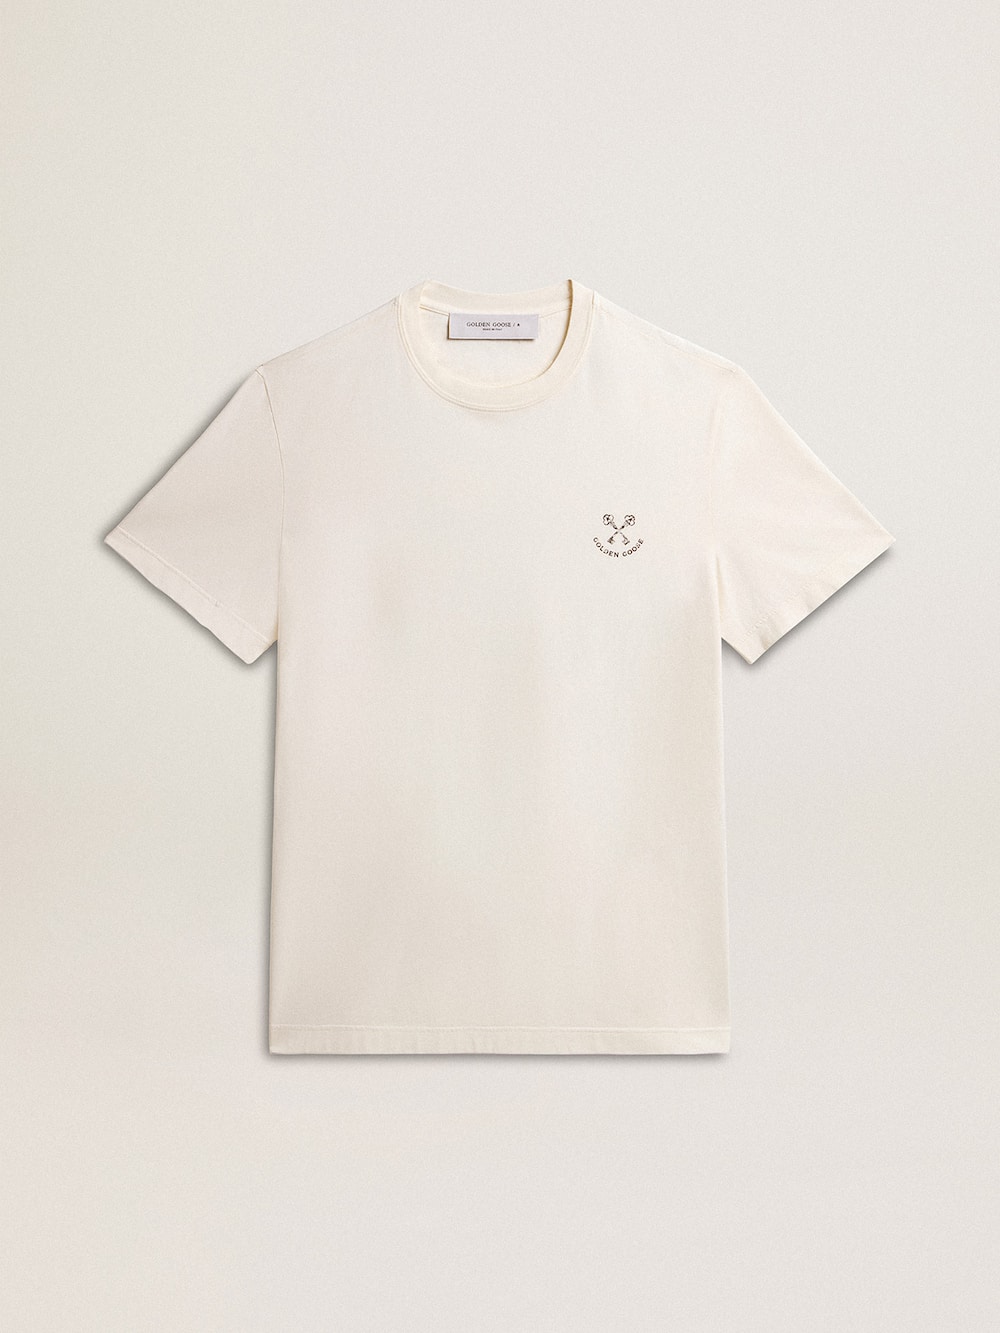 Golden Goose - Men's cotton T-shirt in aged white with print on the heart in 